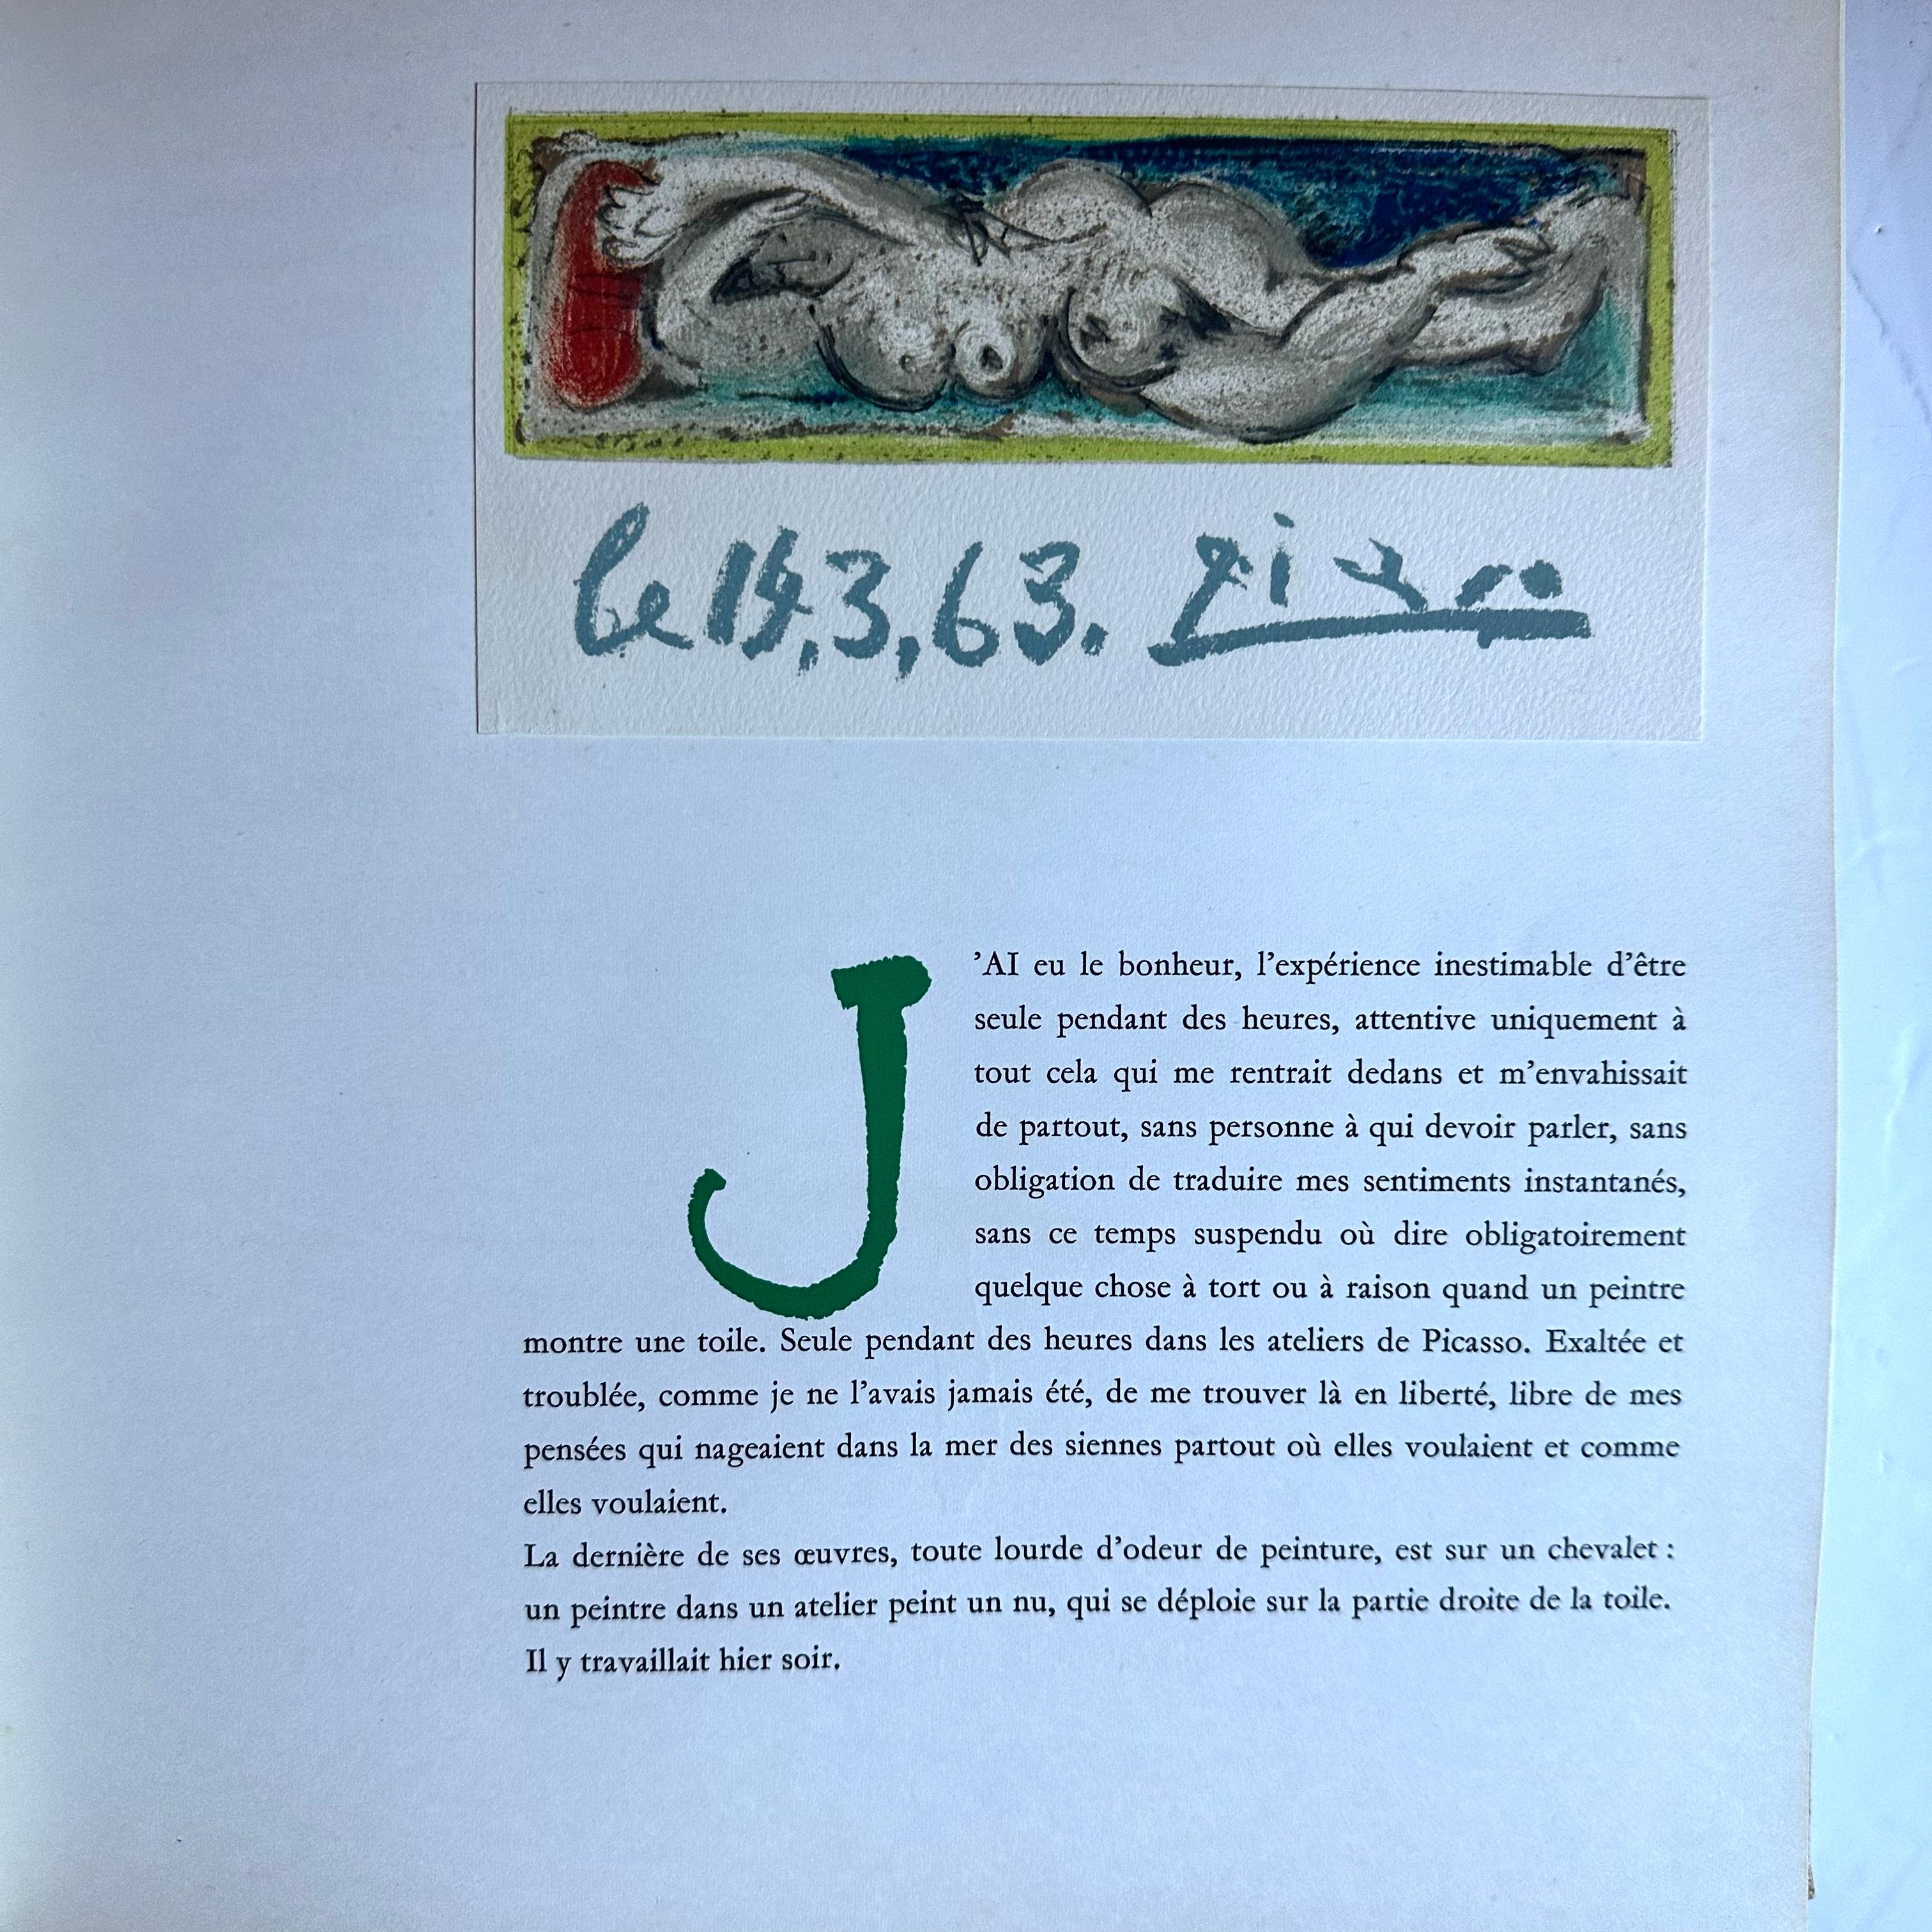 Published by Éditions Cercle d’Art, 1st edition, Paris 1964. Hardback with French text.

This scarce catalogue of Picasso’s oeuvre is like an imaginary museum plentiful of paintings, sculptures, and other papier-mâché works made by Picasso during